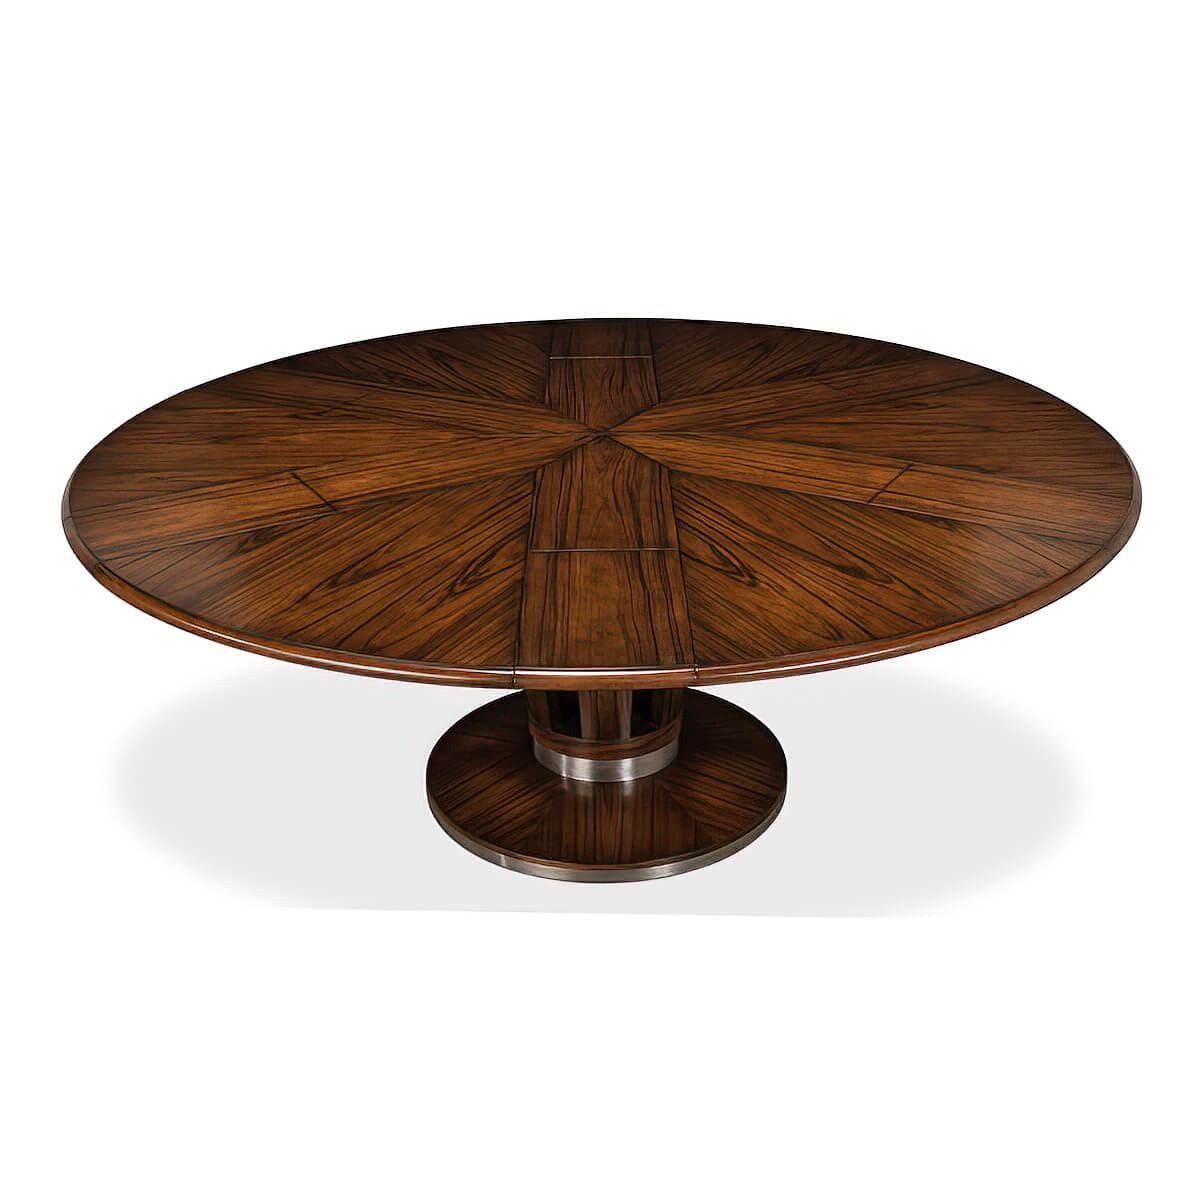 Vietnamese Art Deco Style Round Extending Dining Table, 84 For Sale